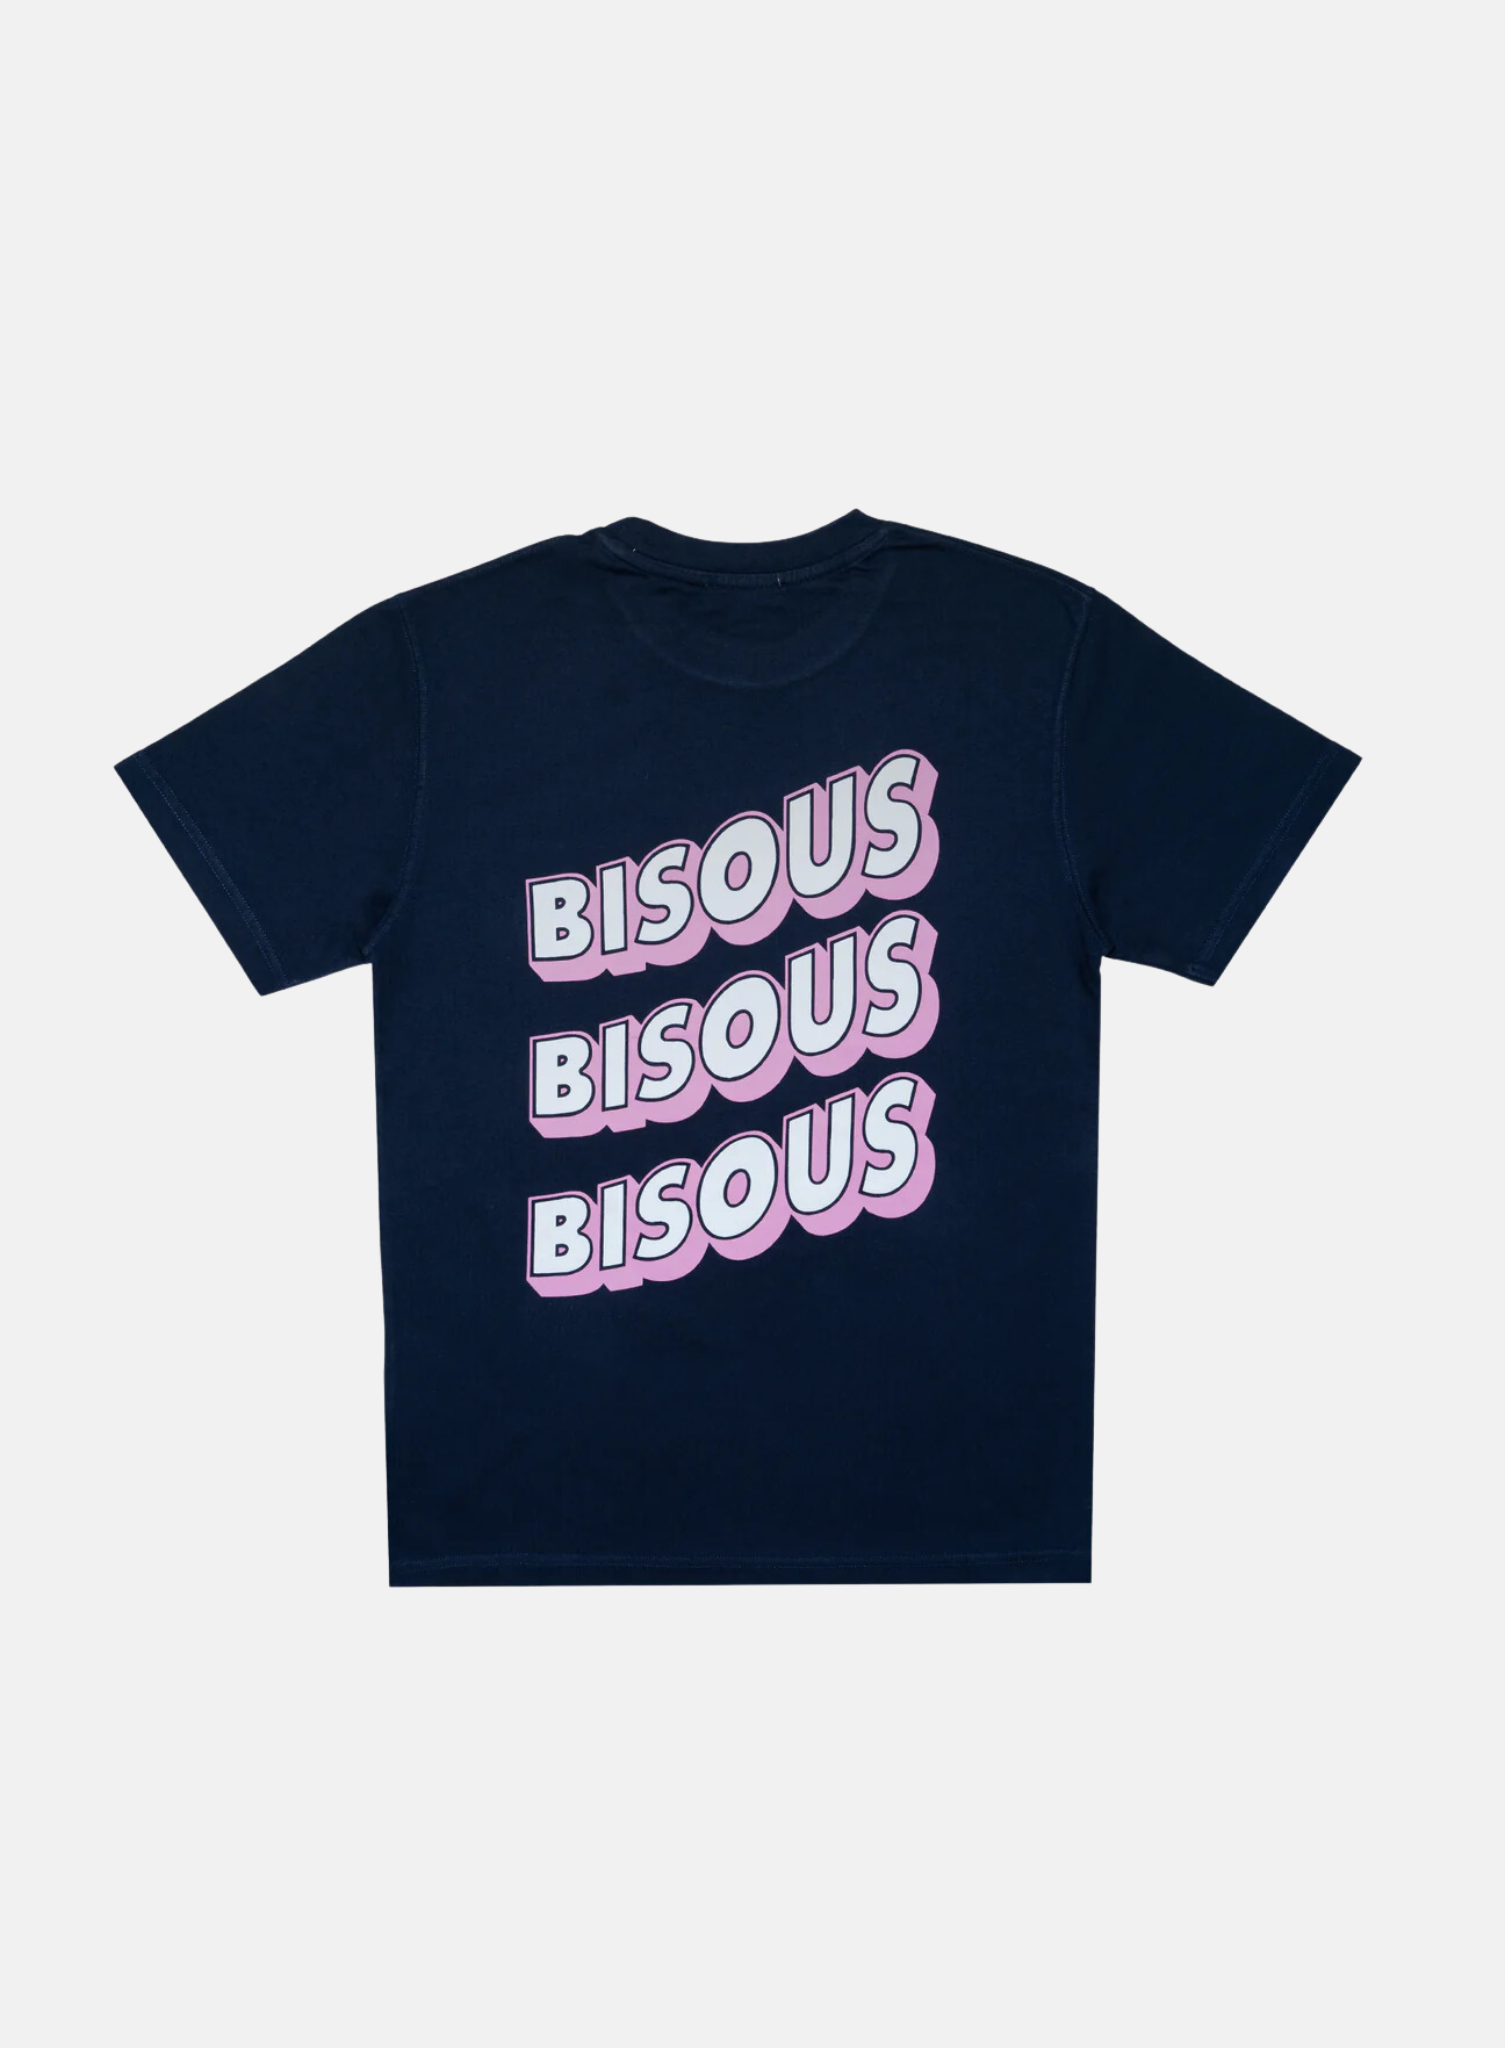 BISOUS SKATEBOARDS SS Sonics Tee Navy - Hympala Store 